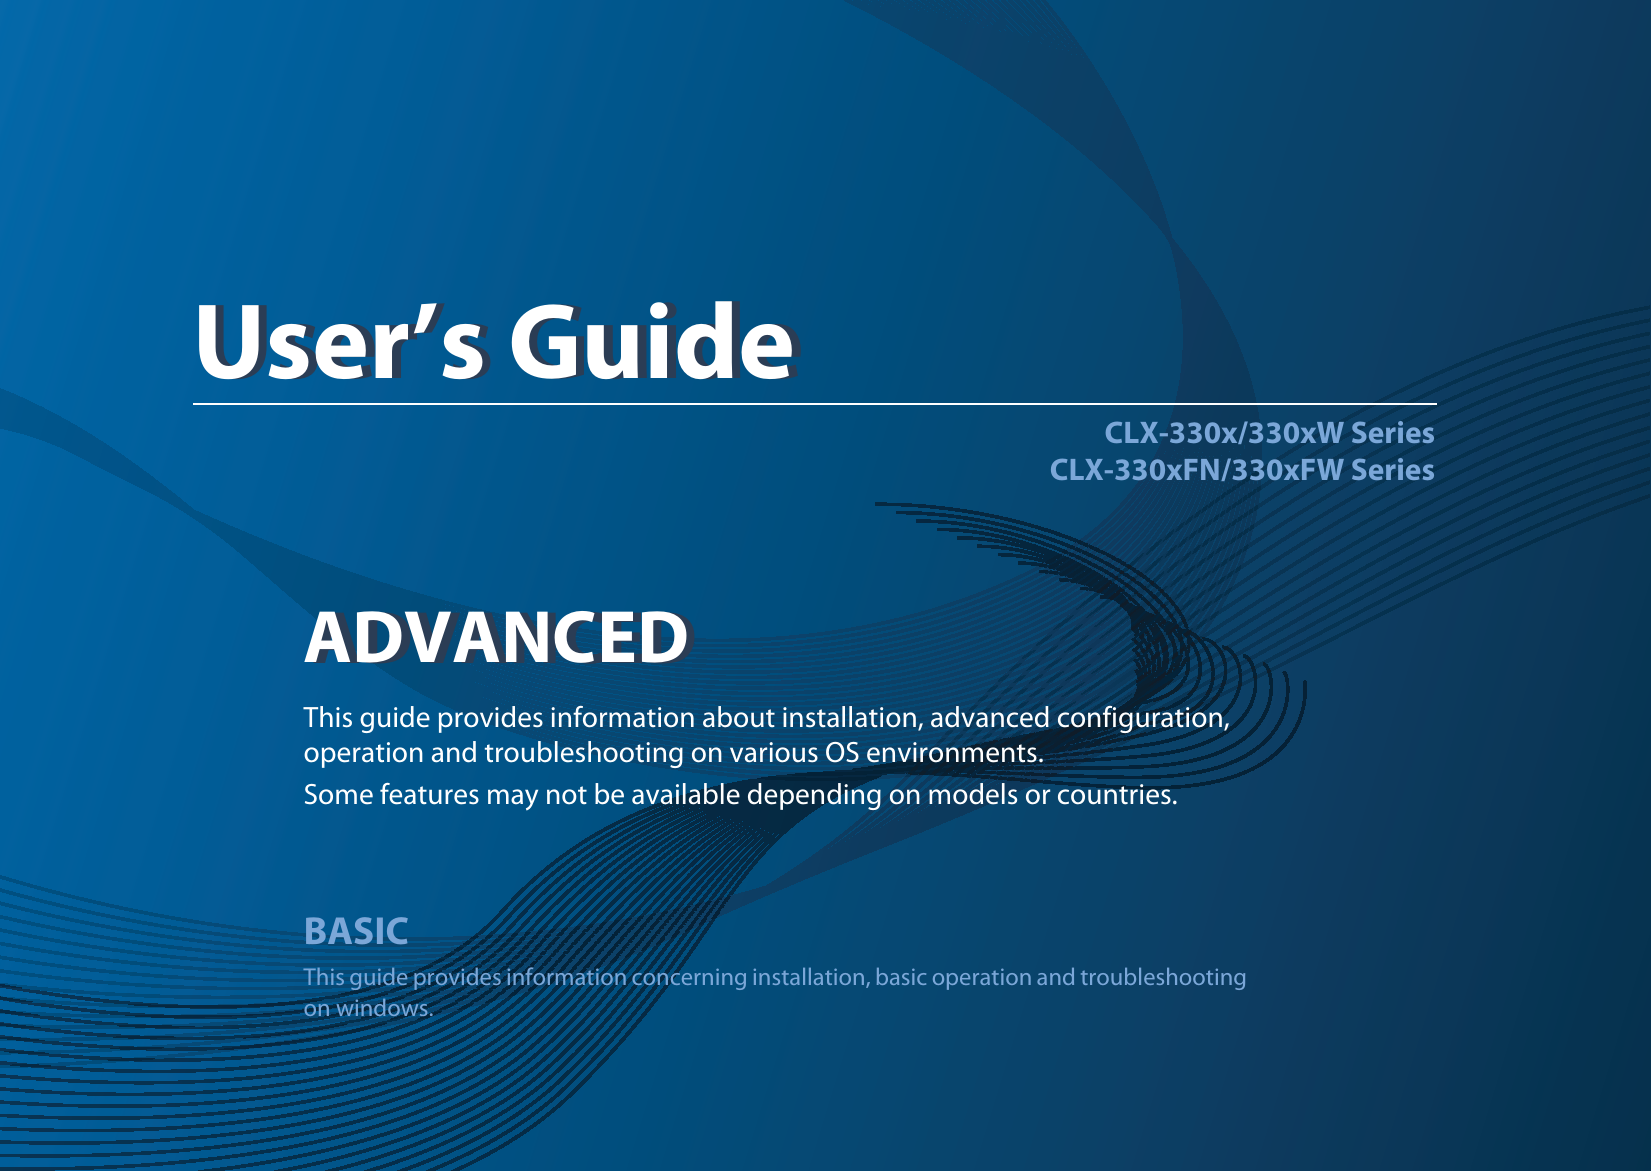 ADVANCEDUser’s GuideCLX-330x/330xW SeriesCLX-330xFN/330xFW SeriesADVANCEDUser’s GuideThis guide provides information about installation, advanced configuration, operation and troubleshooting on various OS environments. Some features may not be available depending on models or countries.BASICThis guide provides information concerning installation, basic operation and troubleshooting on windows.